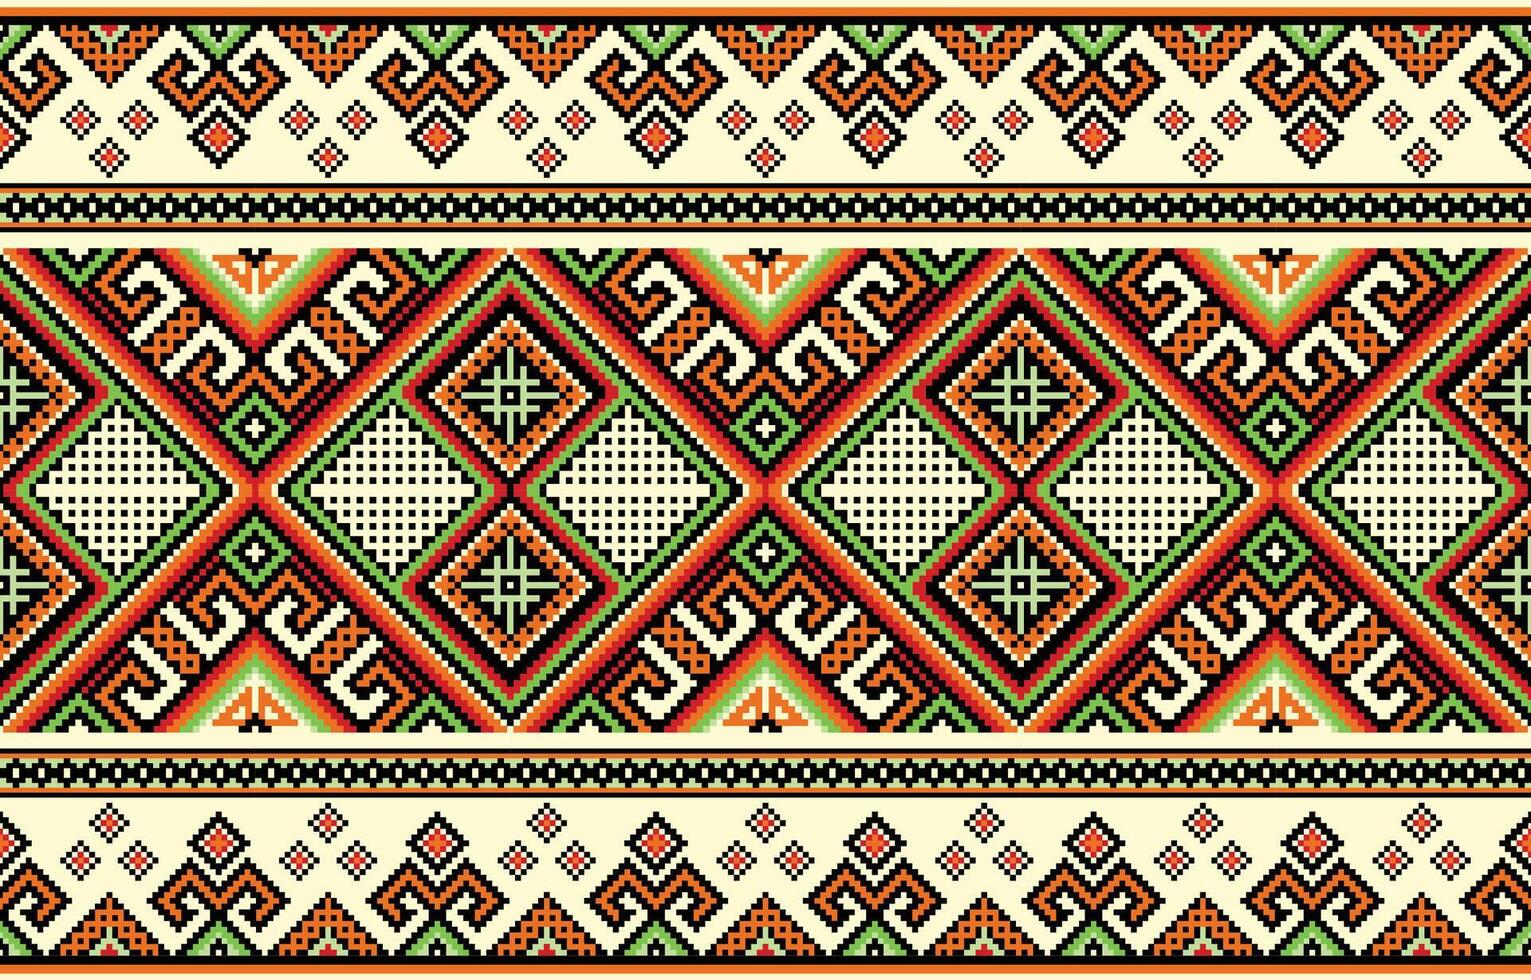 Native American inspired This colorful pattern features interlocking diamonds, squares and triangles on a beige background vector